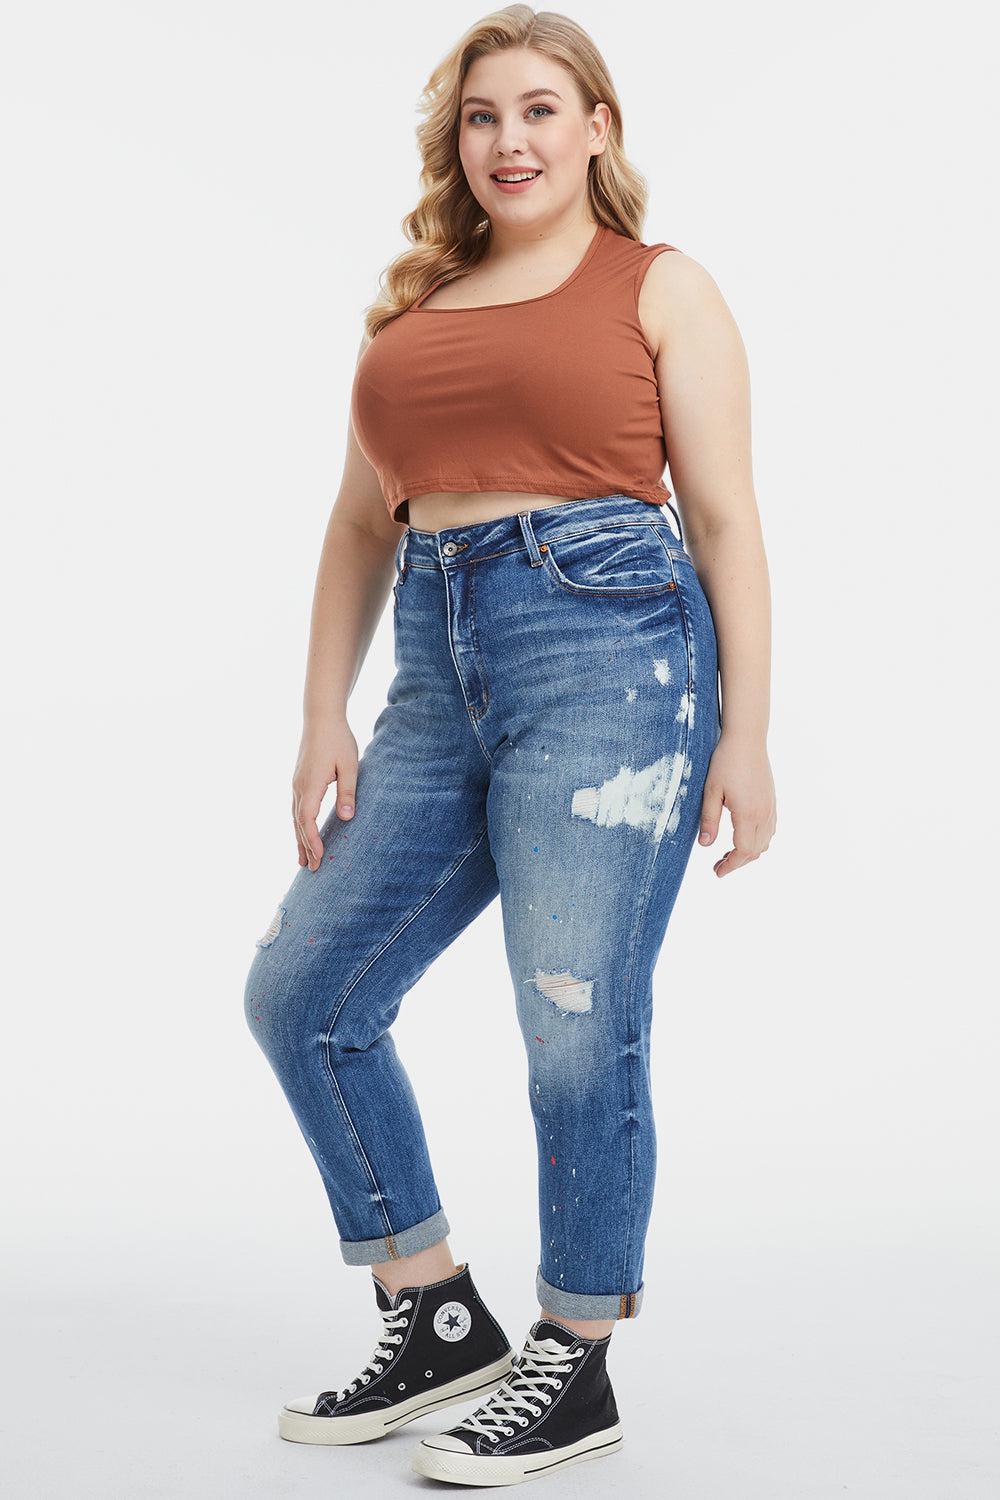 a woman in a brown tank top and ripped jeans